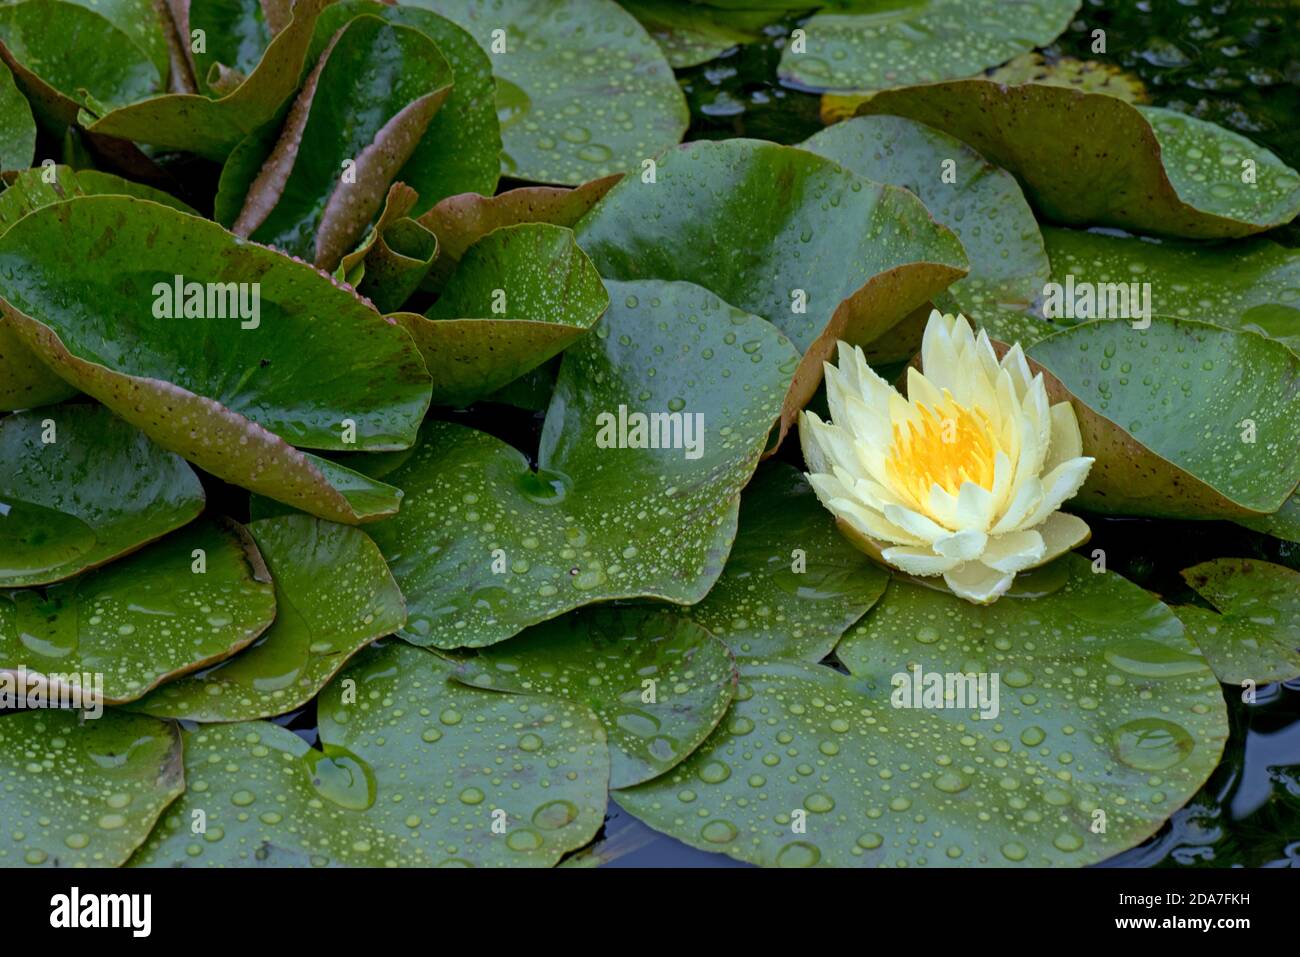 Yellow water lily ( Nymphaea sp.) flowering among  leaves covered by rain droplets, Berkshire, August Stock Photo